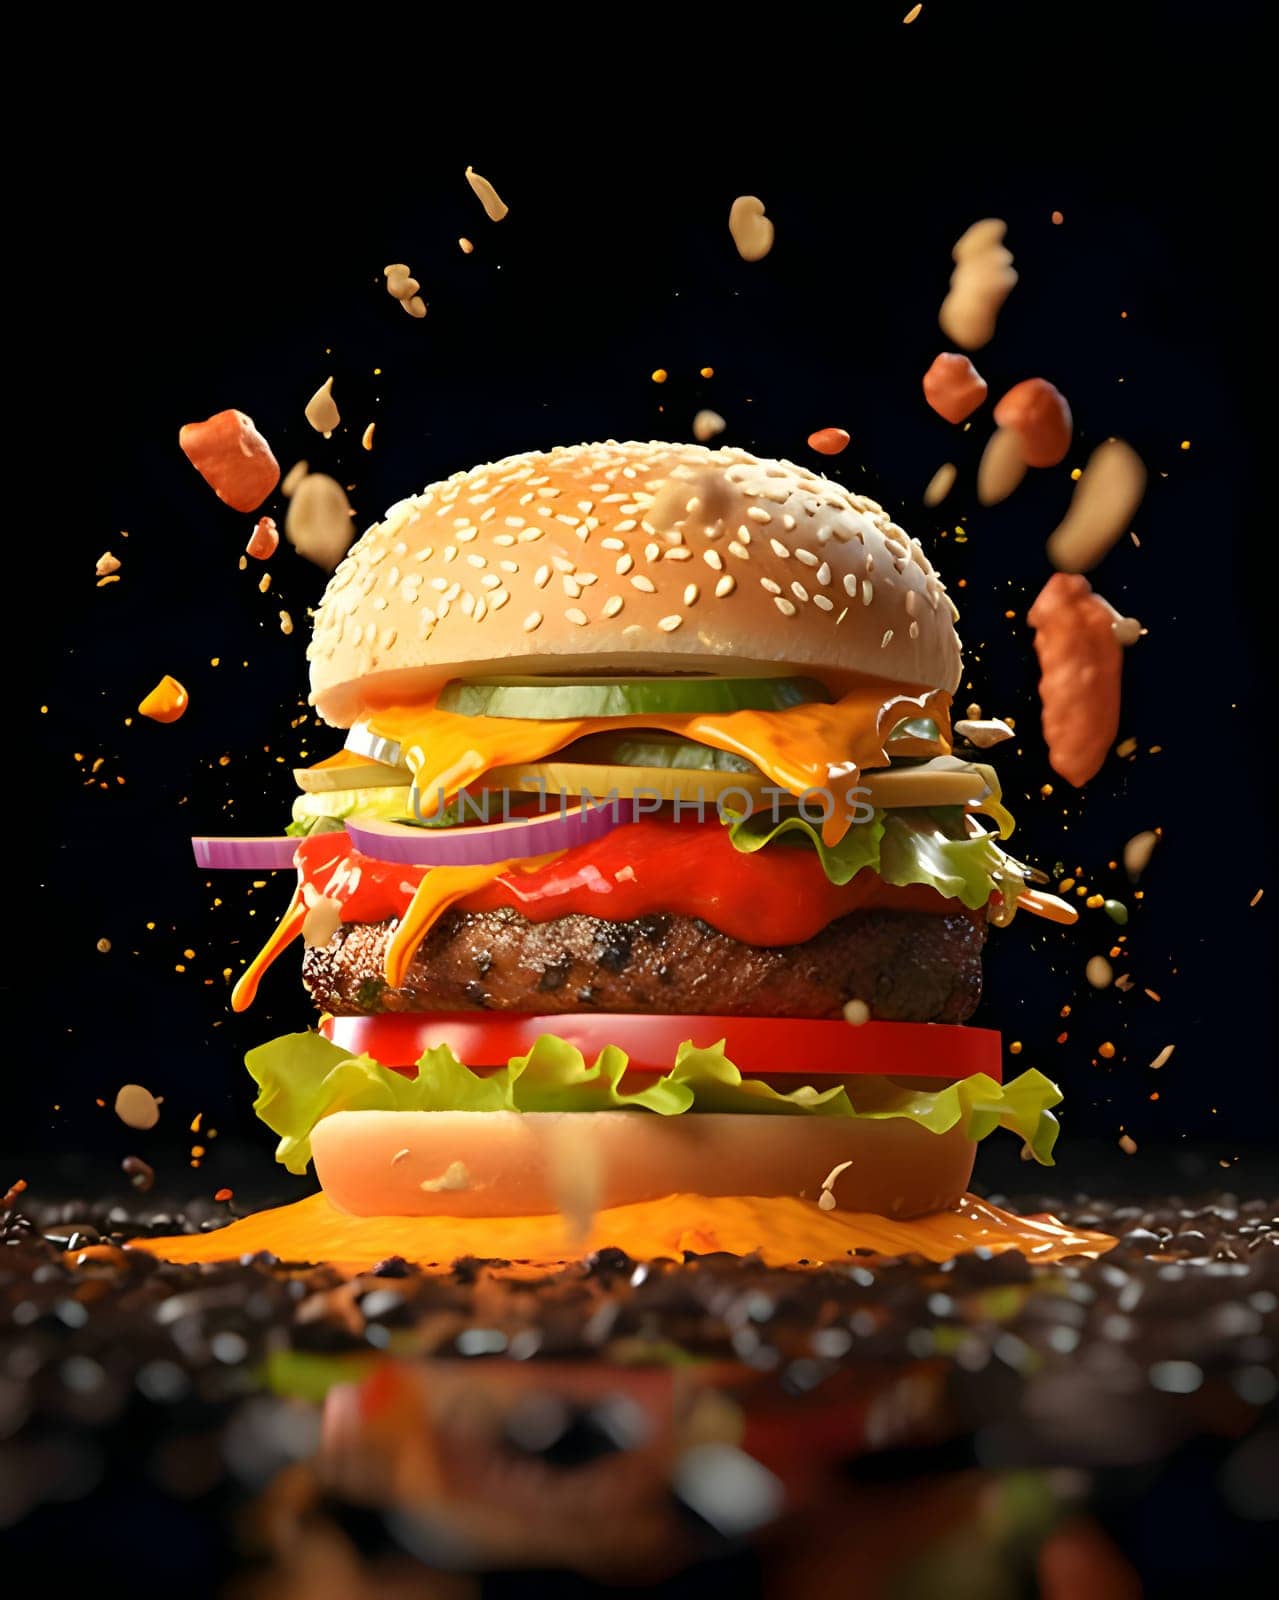 A delicious multi-layered burger with crisp lettuce, melted cheese, juicy tomato, and savory onion, showcased on a dark background.